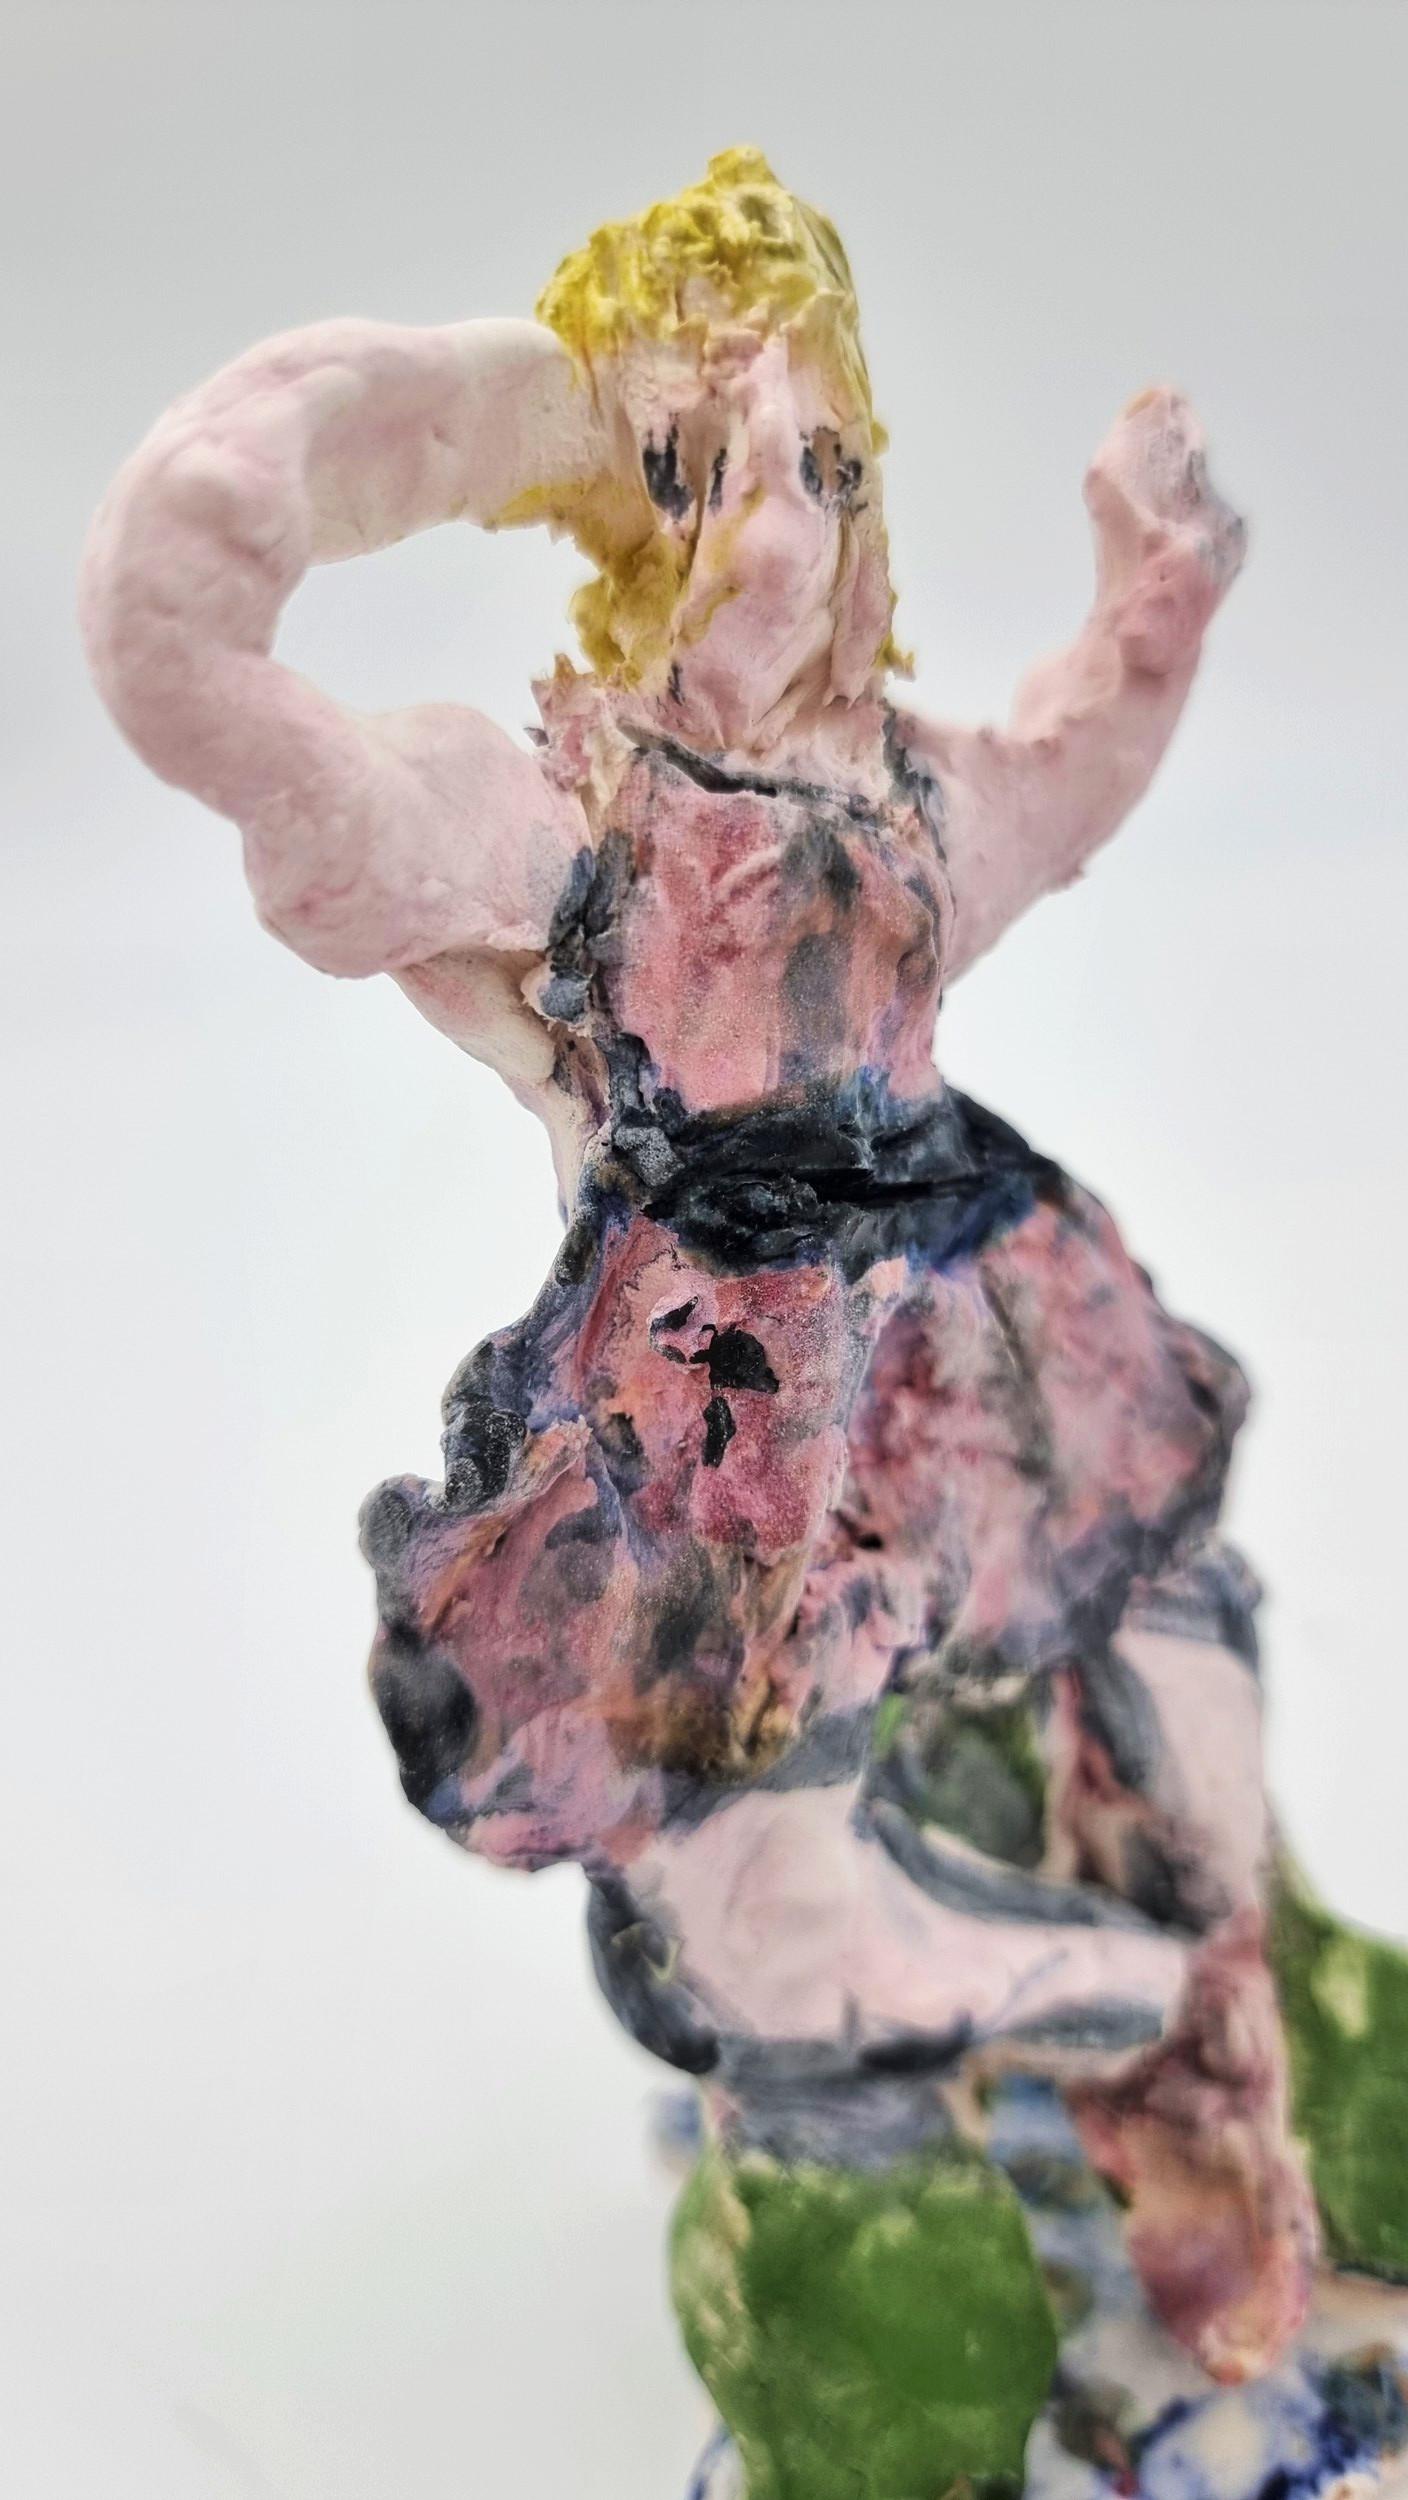 Ann Rothman
Pink Ballerina (Circus, Whimsical, Viola Frey, Delicate, Playful, Fun, Cirque du Soleil, The Ringling Bros., Barnum & Bailey)
2021
Porcelain, Low Fire Glazes, Crayons, Watercolors
Fired Cone 06, 04
5.5 x 3 x 3 inches
COA provided
Ref.: